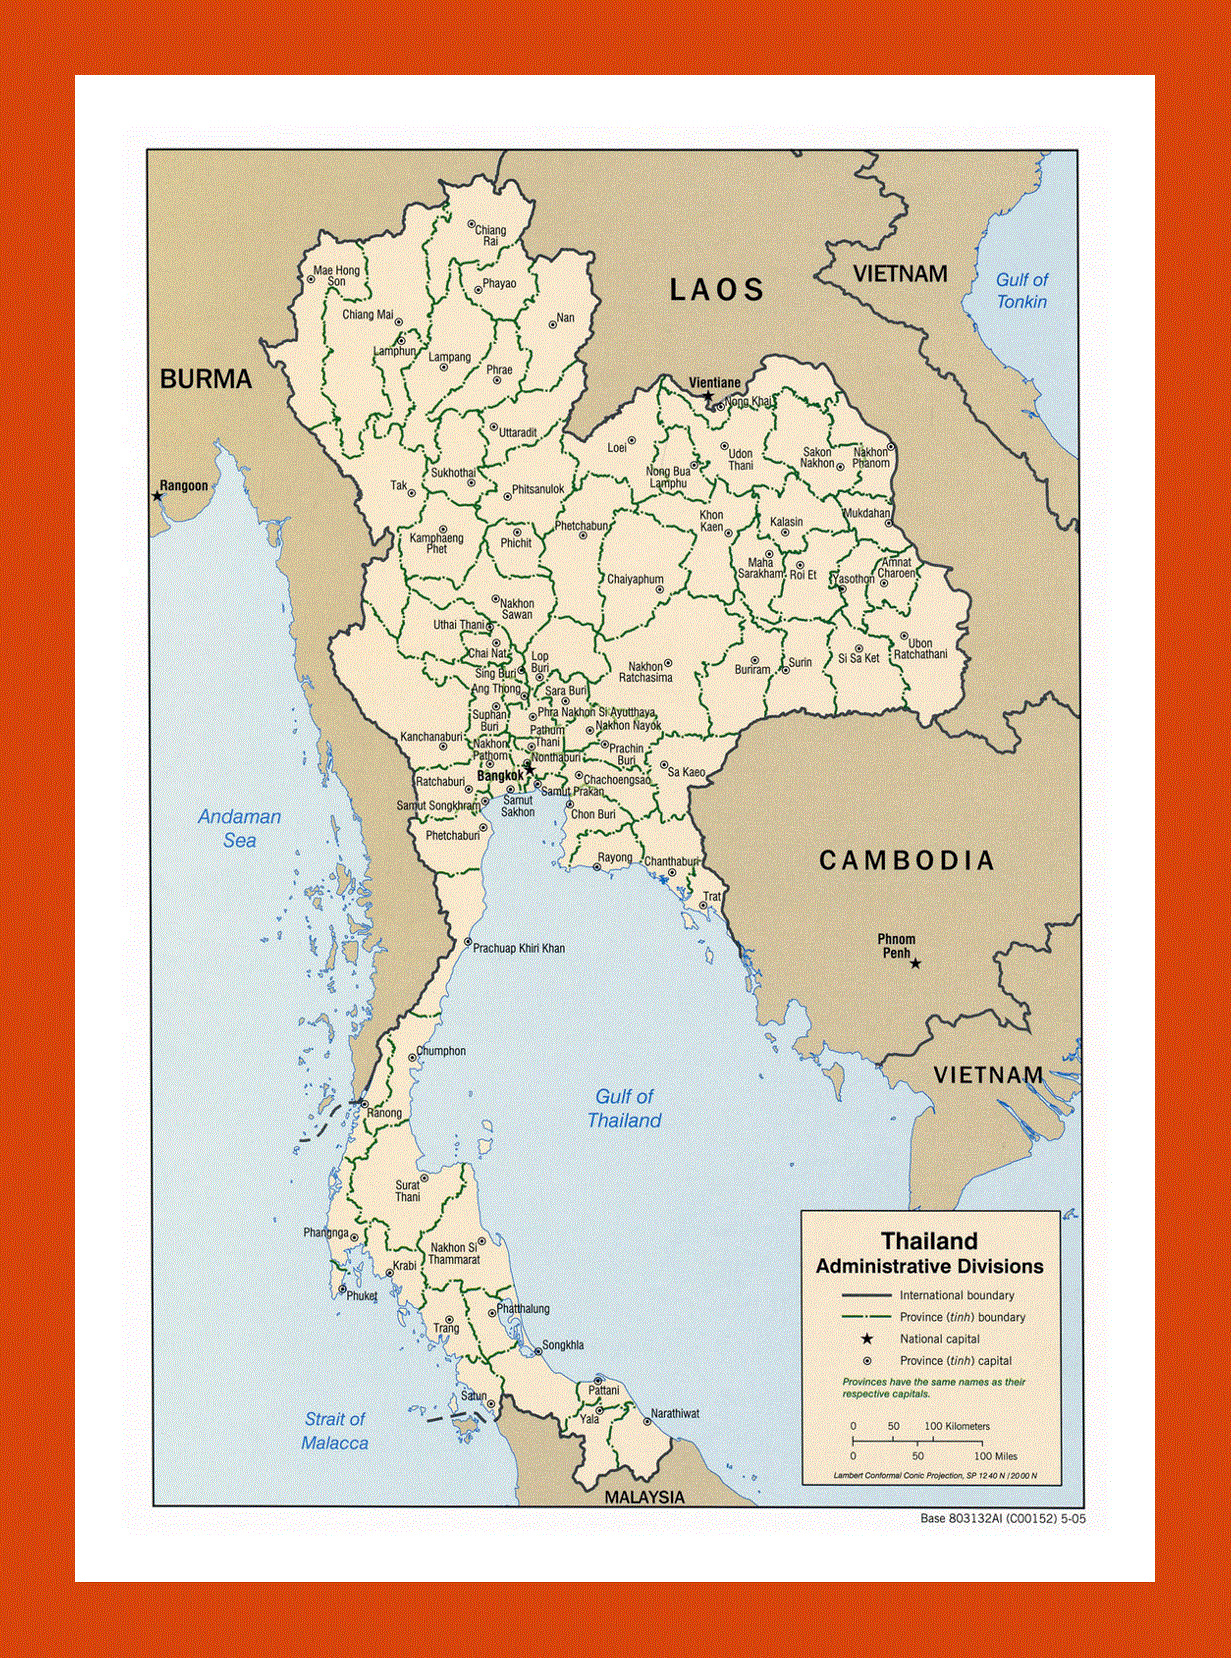 Administrative divisions map of Thailand - 2005